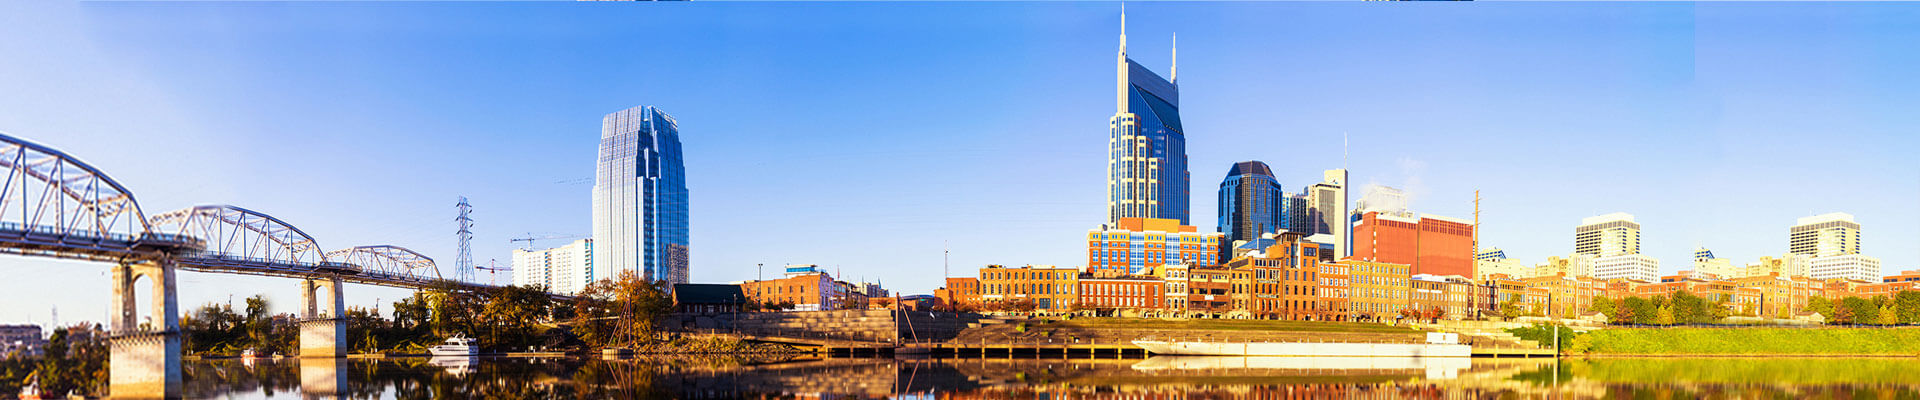 city-of-nashville-in-tennessee